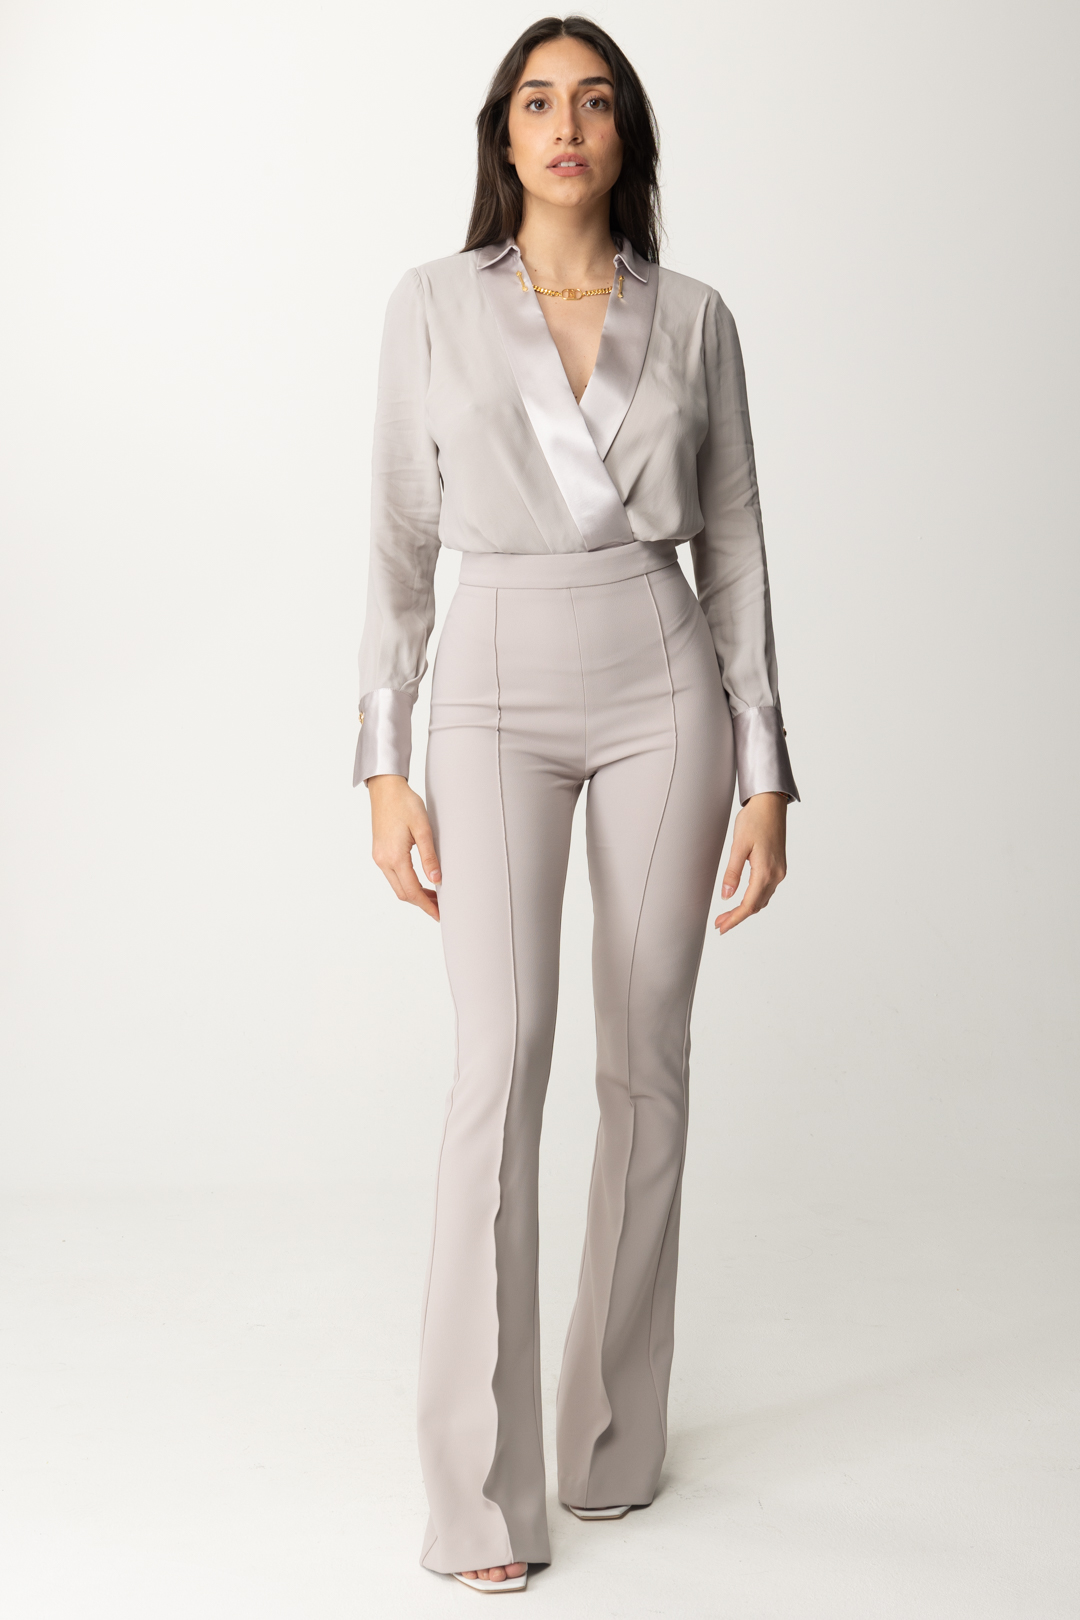 Preview: Elisabetta Franchi Combined Jumpsuit with Collar Accessory Perla